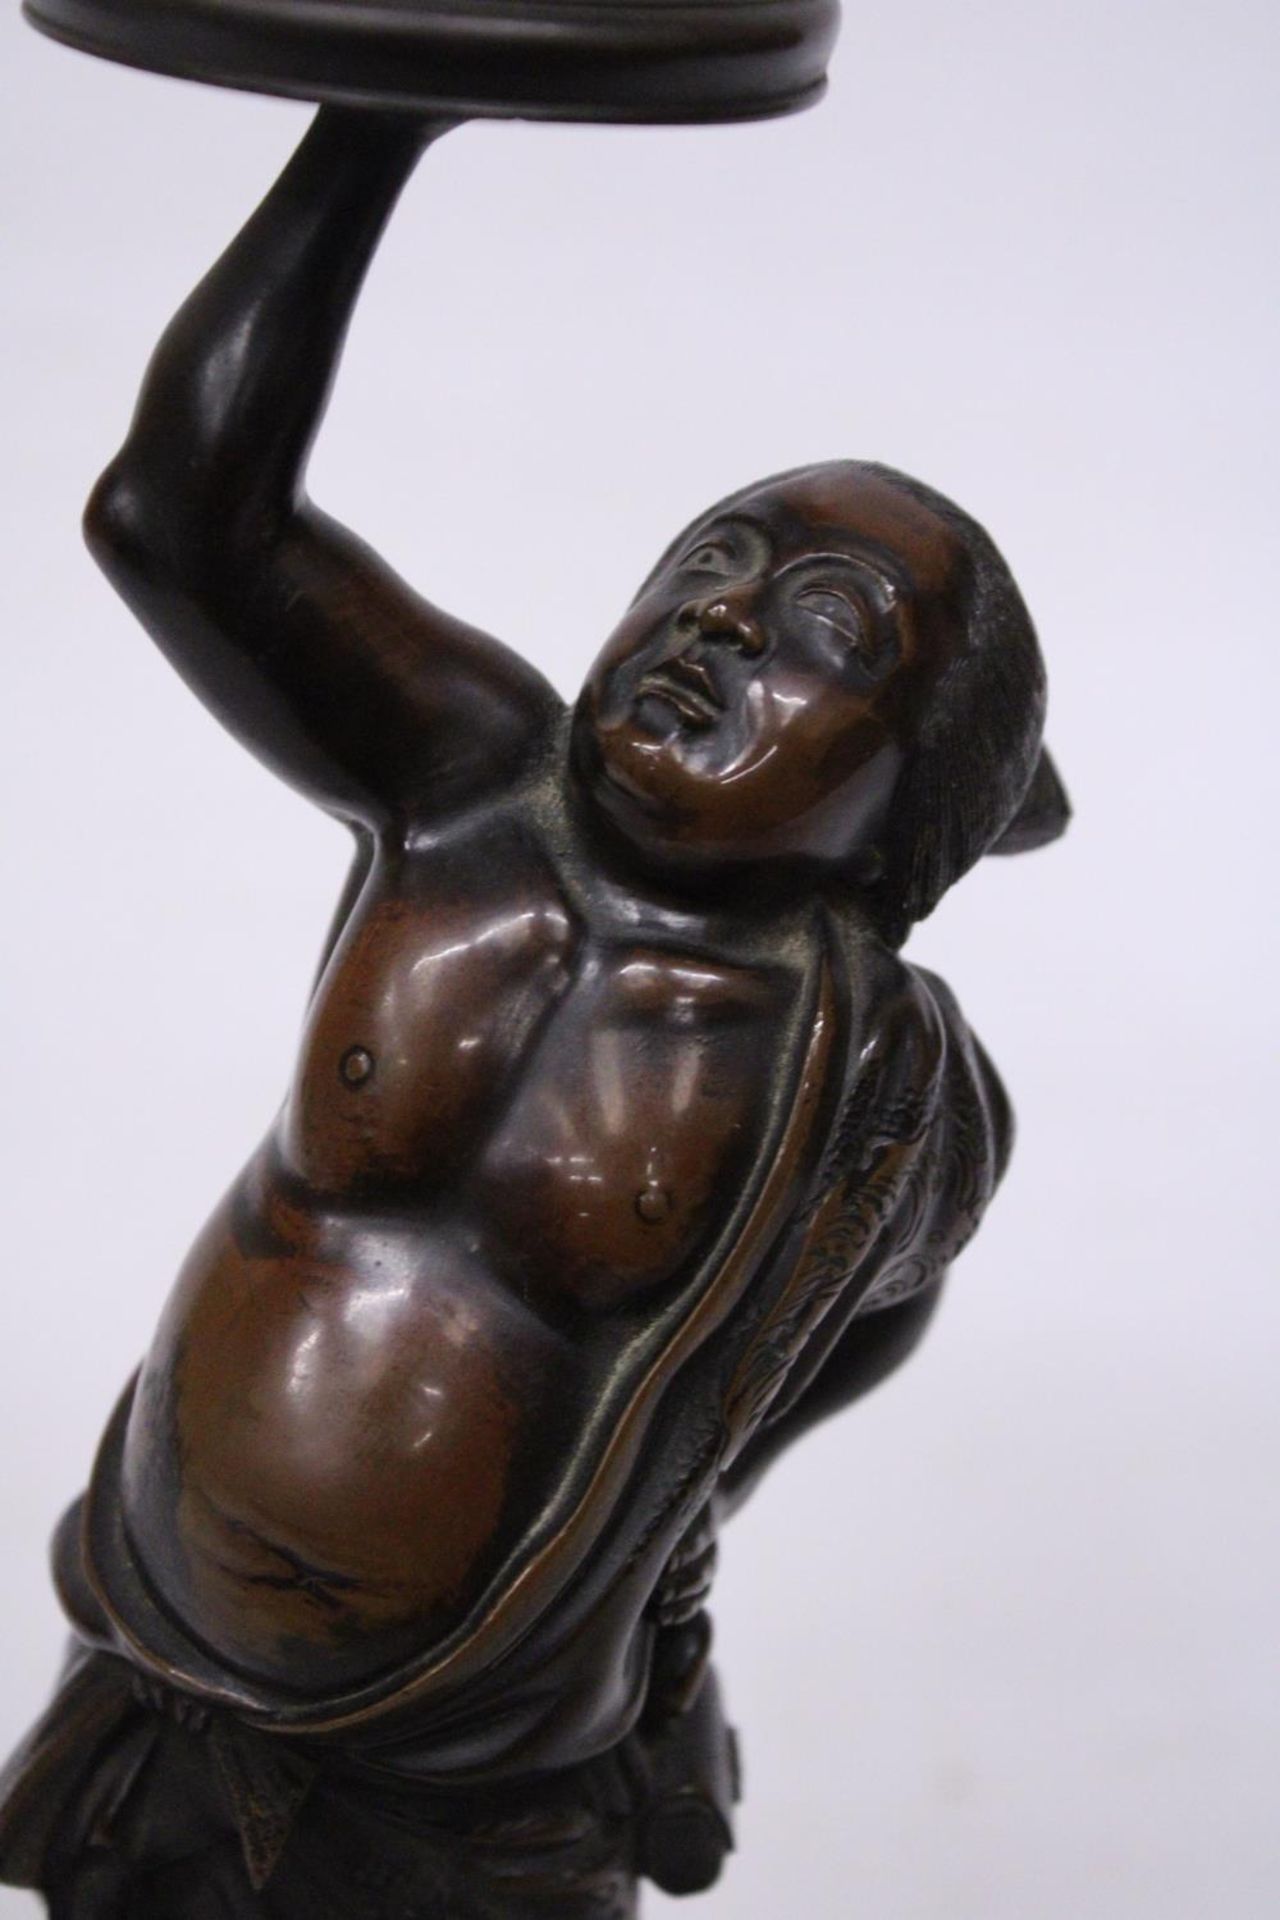 A BRONZE MEIJI PERIOD STATUE OF A FIGURE HOLDING A VASE WITH COVER - Image 6 of 7